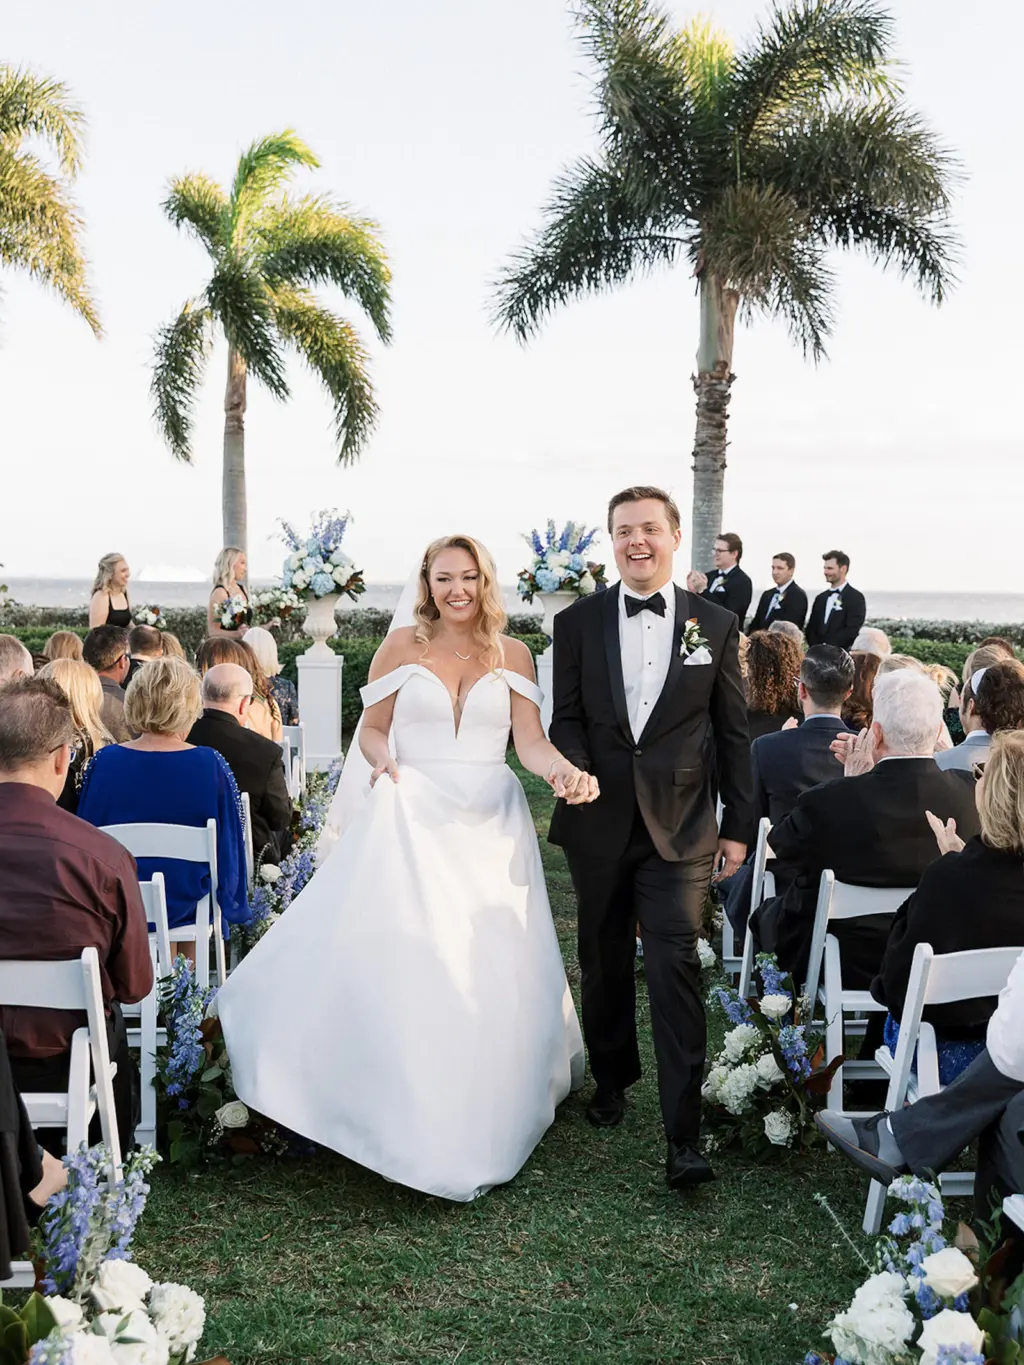 Bride and Groom Just Married Wedding Portrait | South Tampa Waterfront Wedding Ceremony | Planner EventFull Weddings